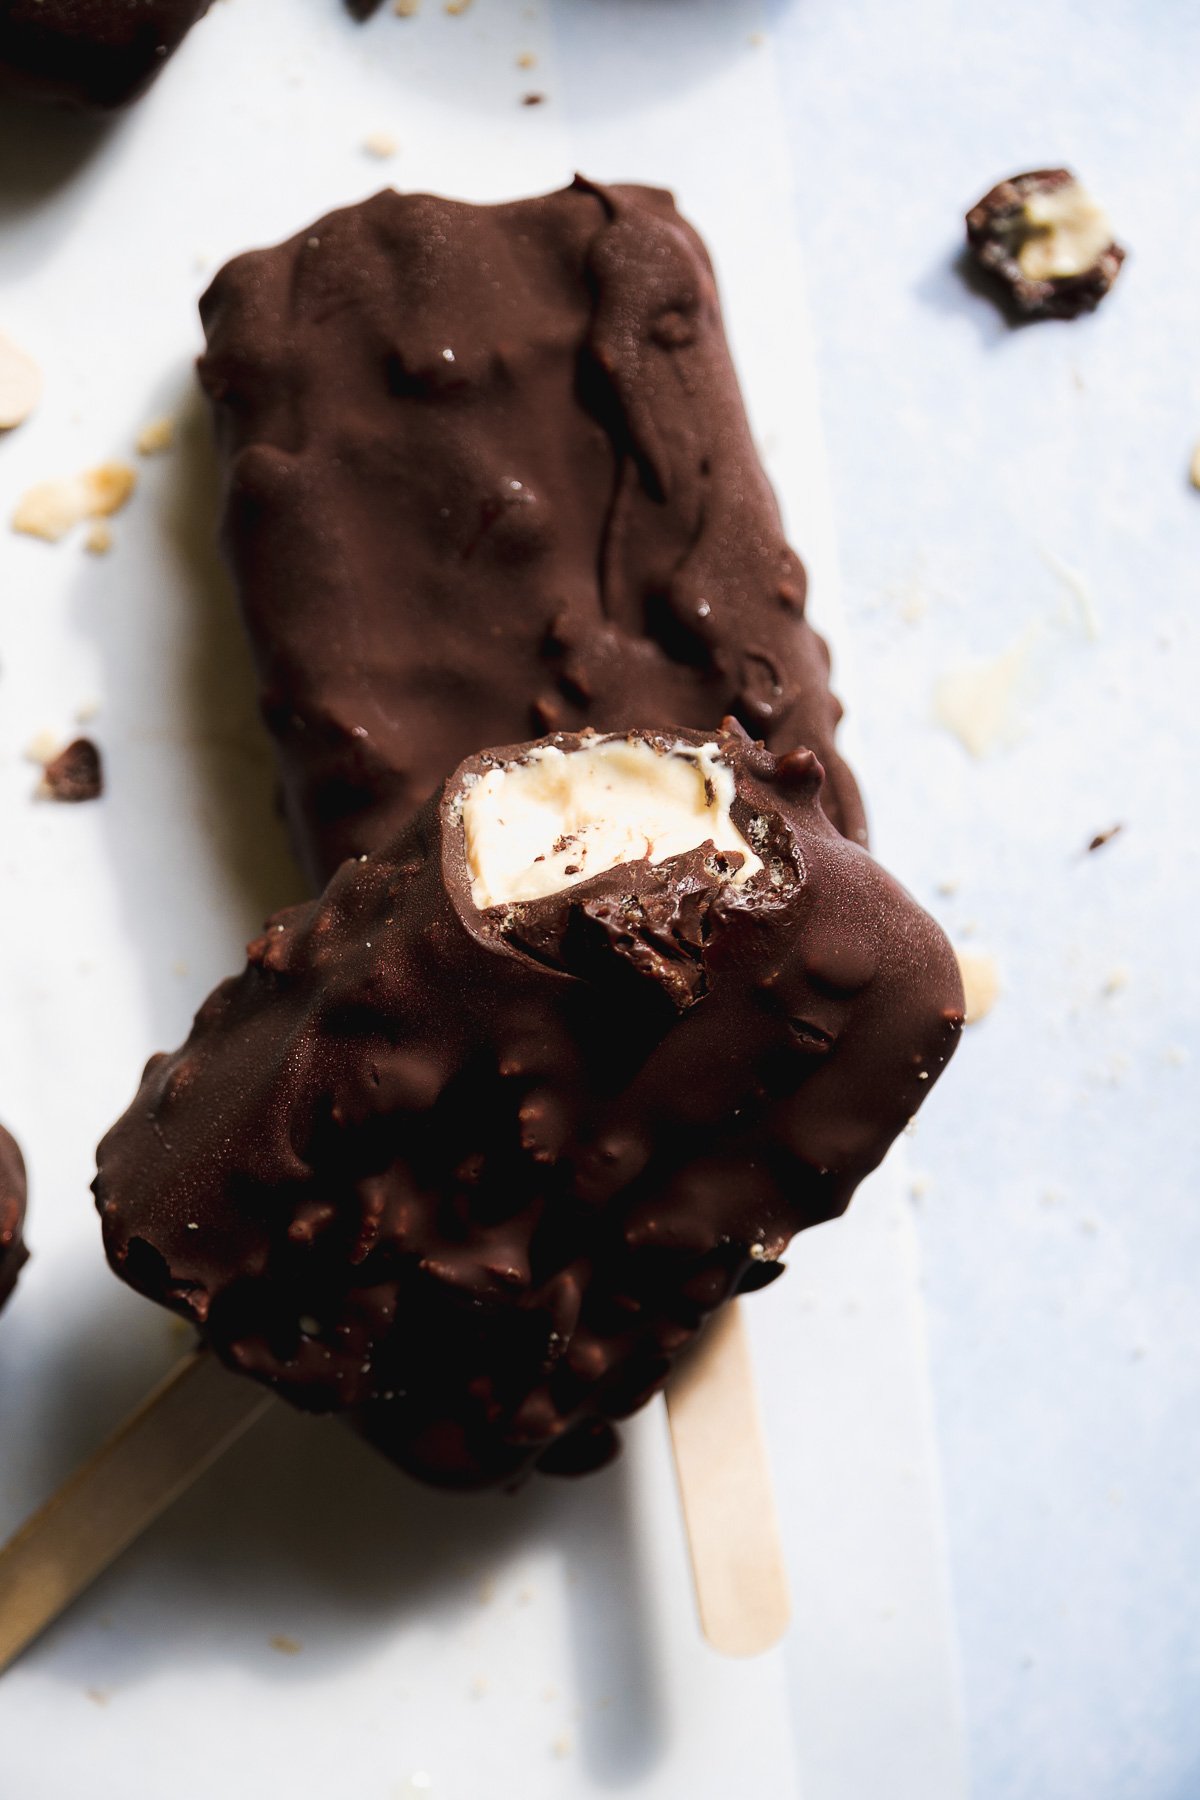 Frozen yogurt bars covered in chocolate with a bite taken out of one.